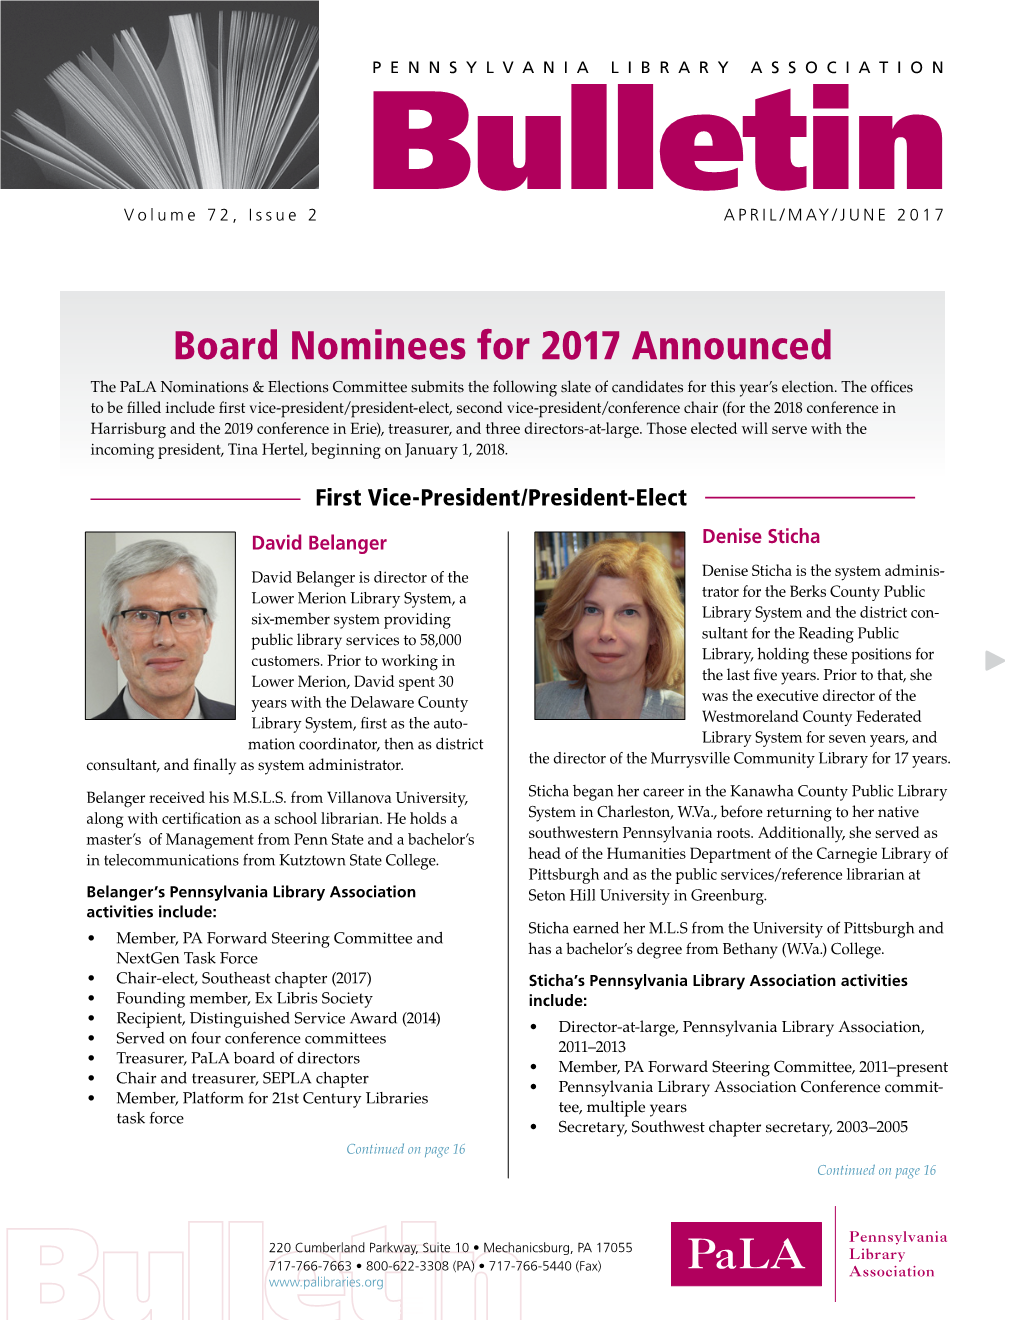 Pala Board Nominees for 2017 Announced